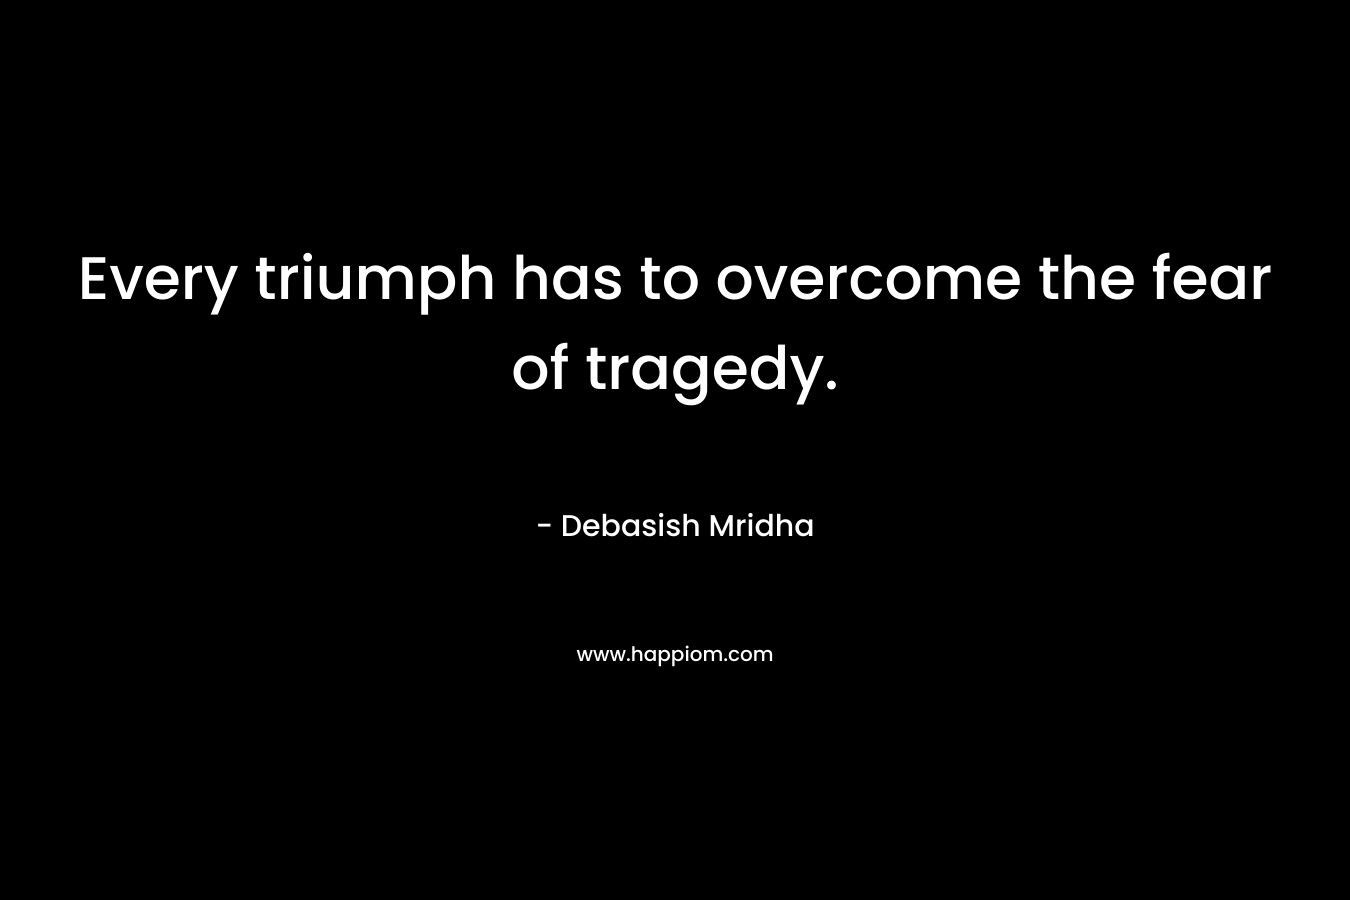 Every triumph has to overcome the fear of tragedy. – Debasish Mridha